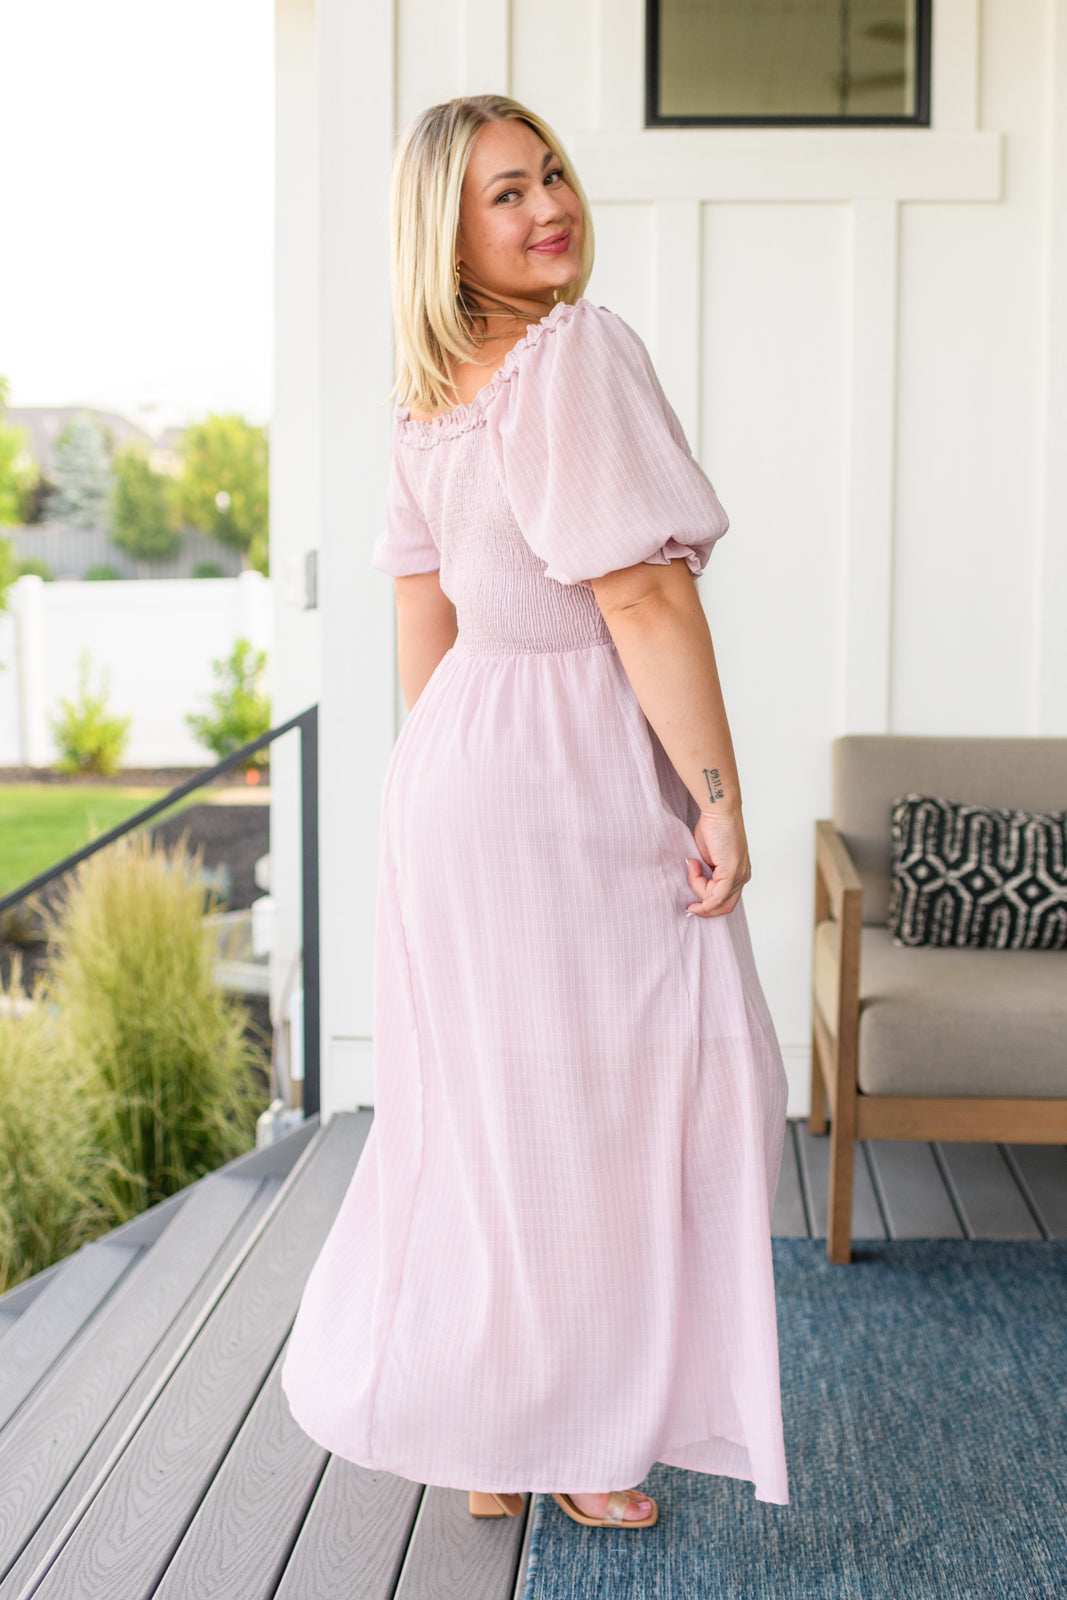 Midday Stroll Dress - AnnRose Boutique